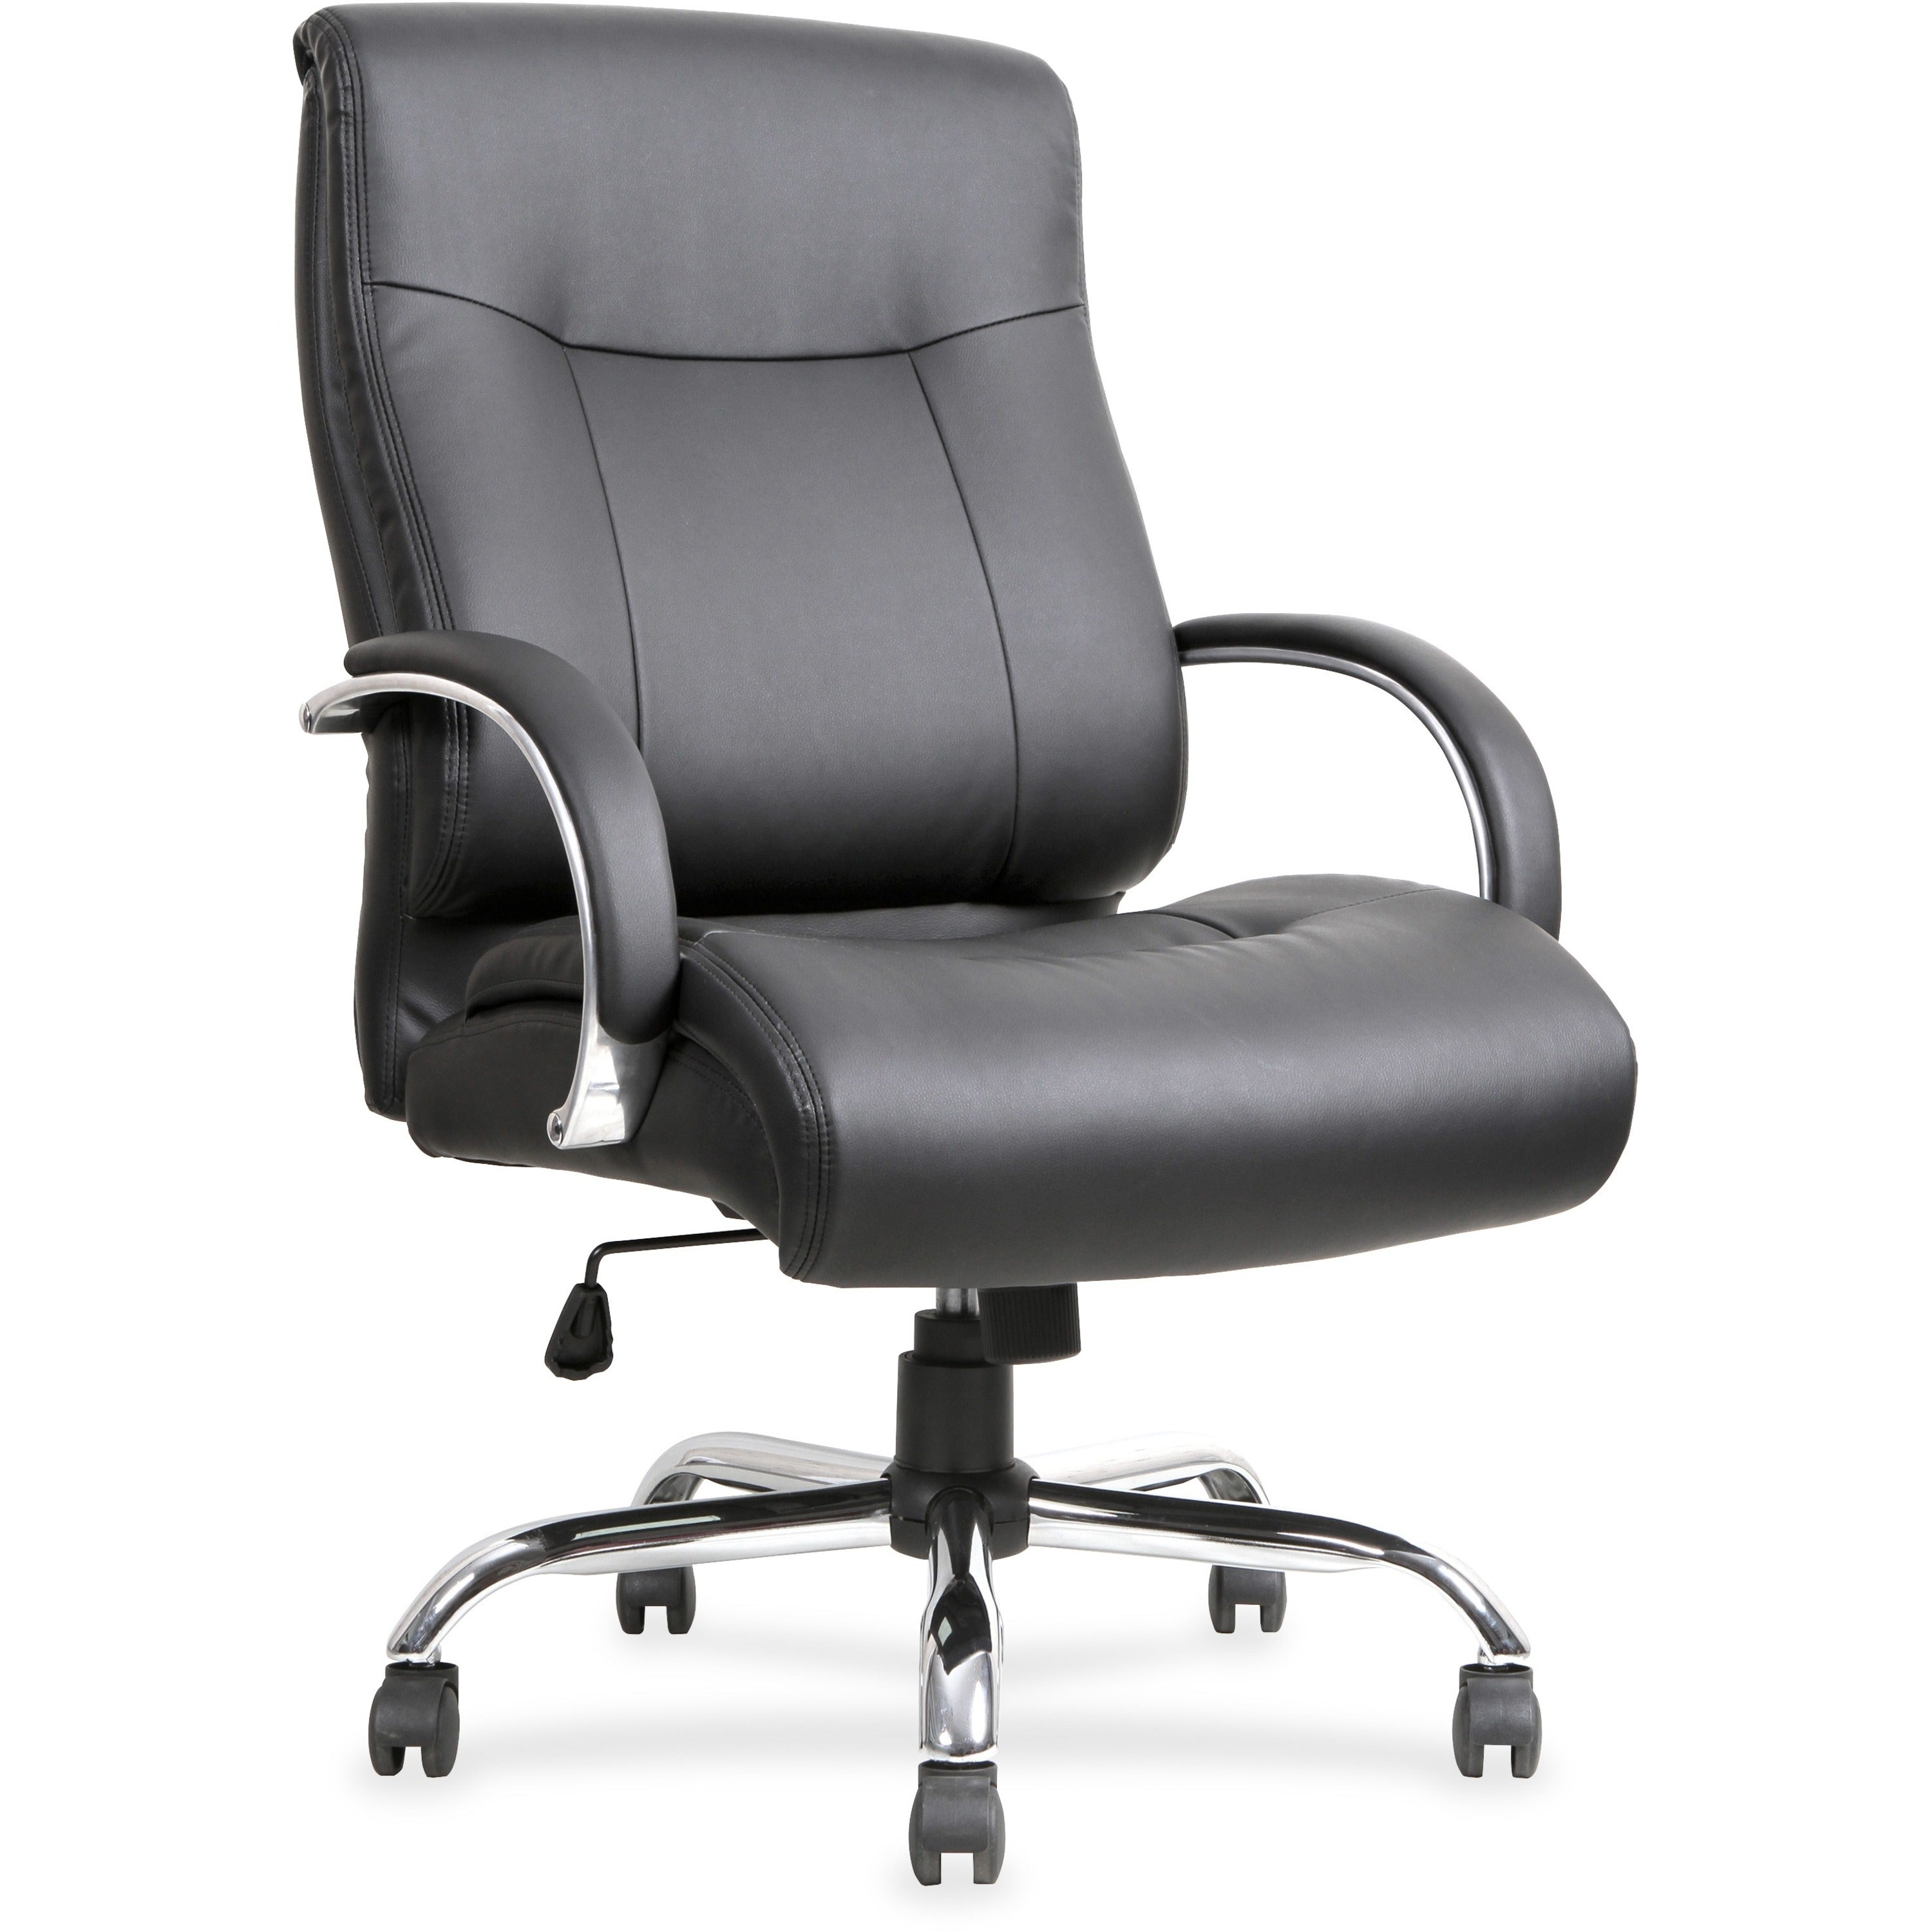 Lorell Deluxe Big & Tall Chair - Black Bonded Leather Seat - Black Bonded Leather Back - 5-star Base - Black - 1 Each - 